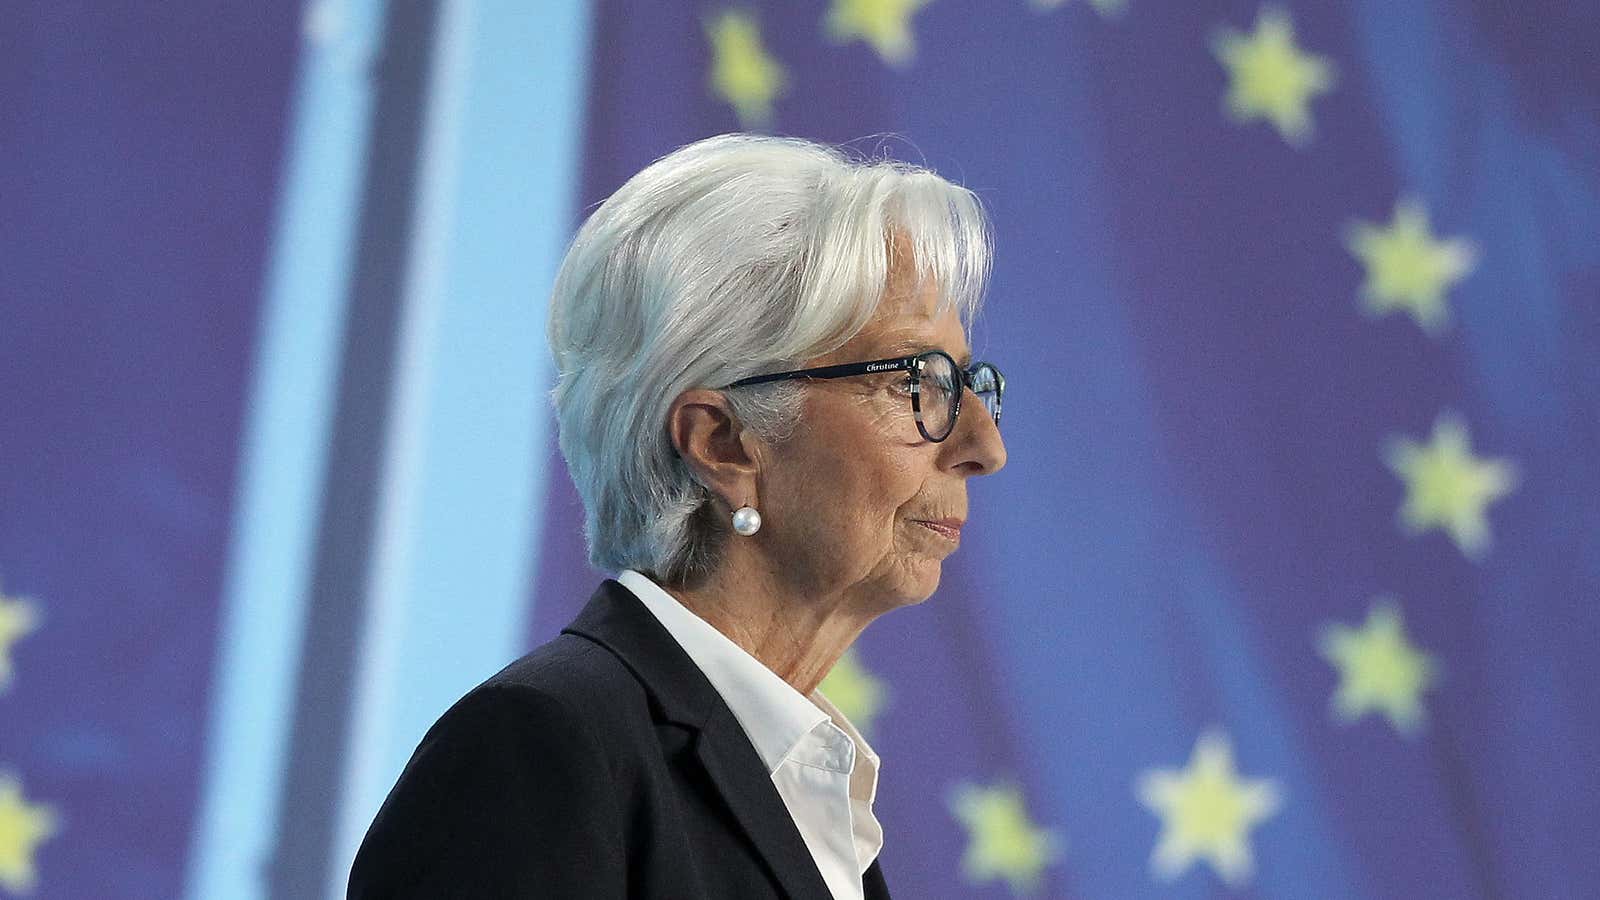 President of the European Central Bank Christine Lagarde holds a press conference on the euro zone monetary policy following the meeting of the governing council of the ECB in Frankfurt am Main, western Germany, on October 27, 2022.